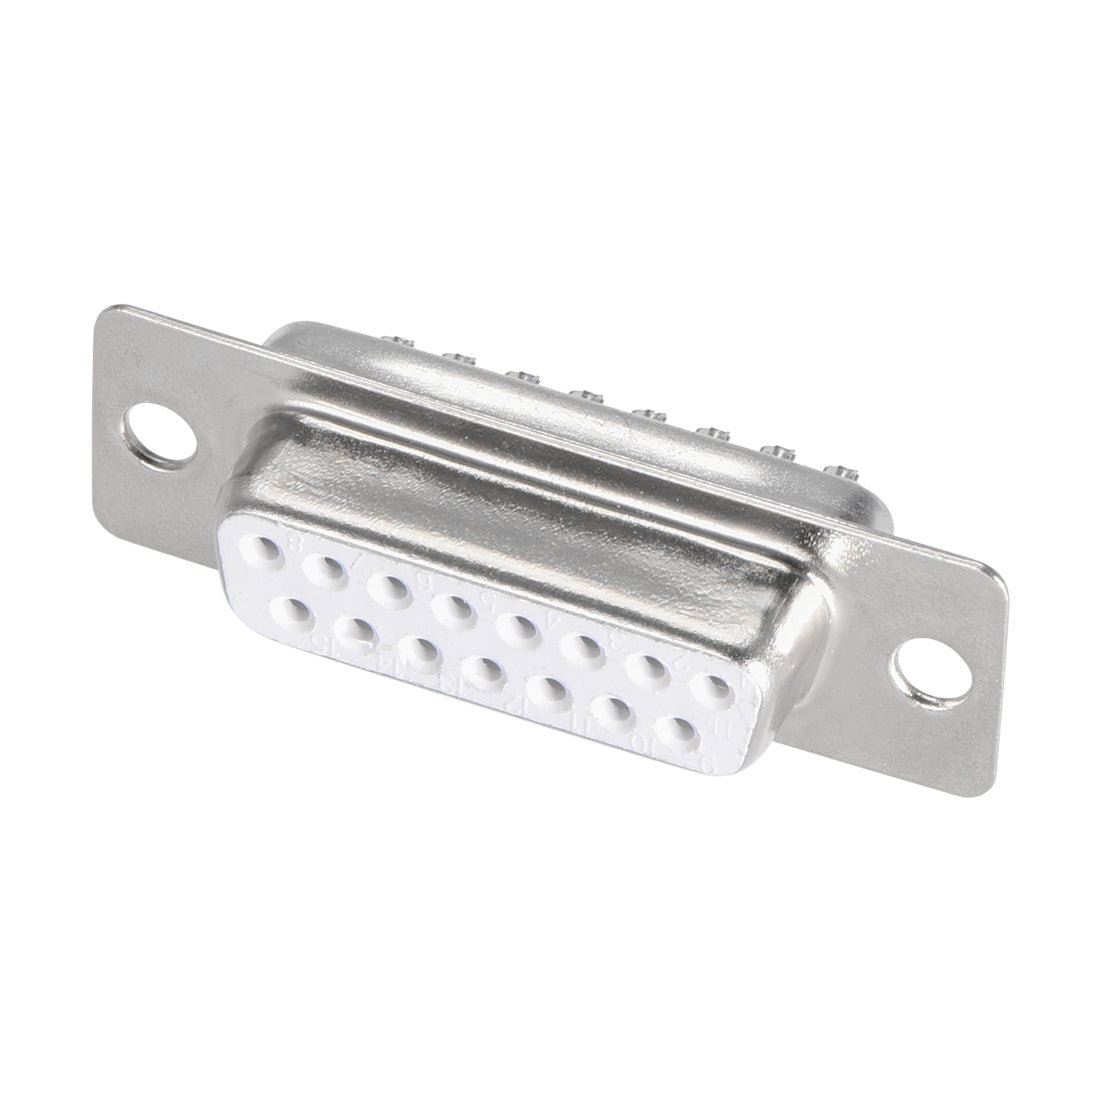 uxcell Uxcell D-sub Connector DB15 Female Socket 15-pin 2-row Port Terminal Breakout for Mechanical Equipment CNC Computers White 1pc